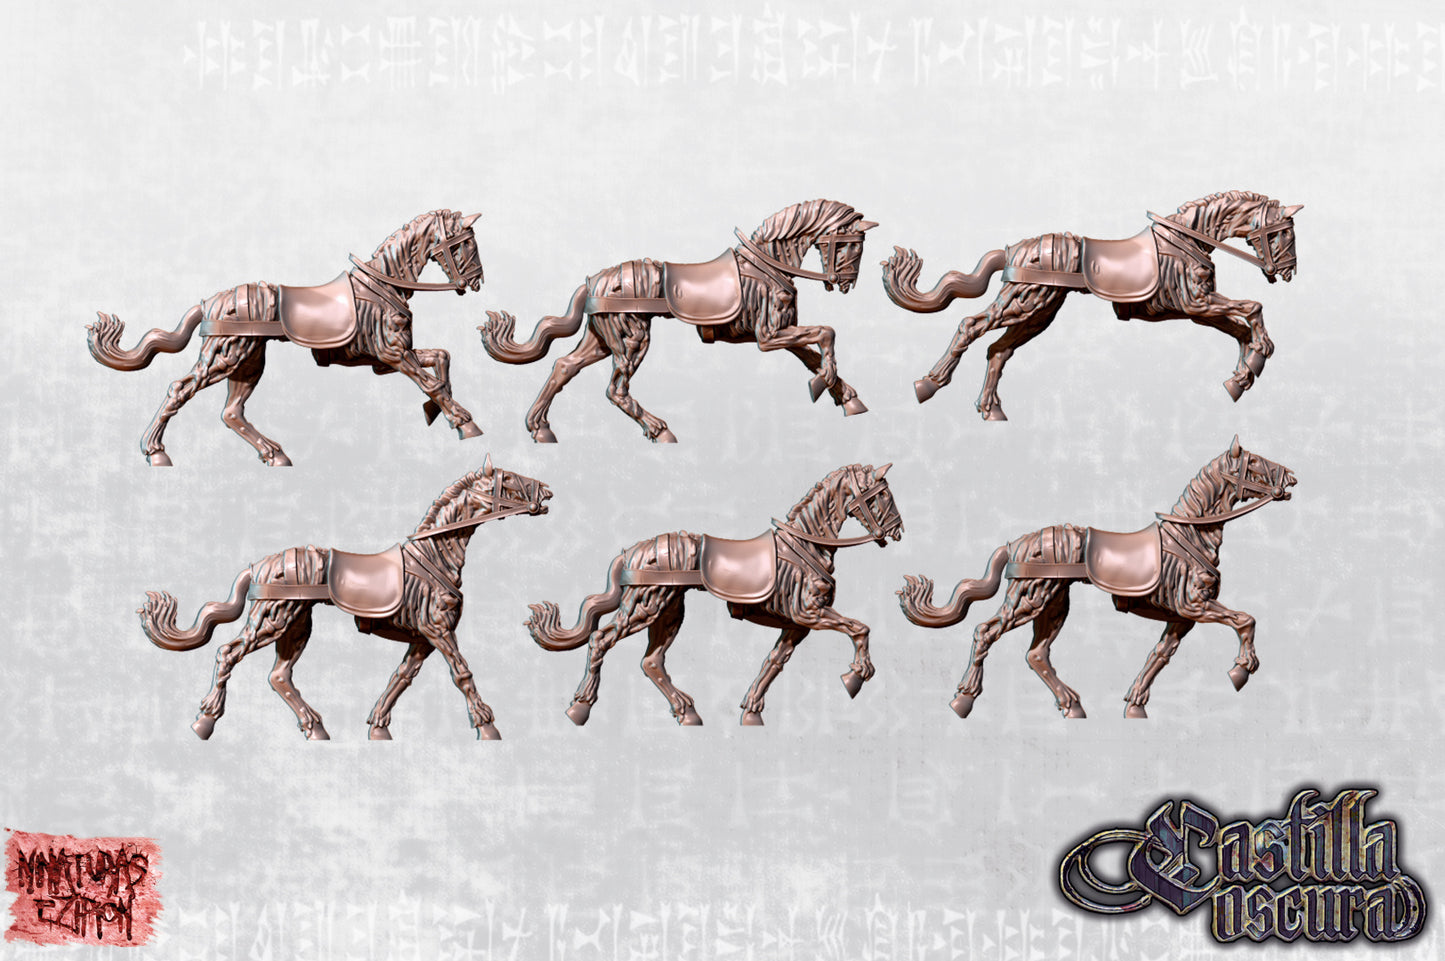 Revived Yeomanry Retinue of Najera on Horse by Ezipion miniatures